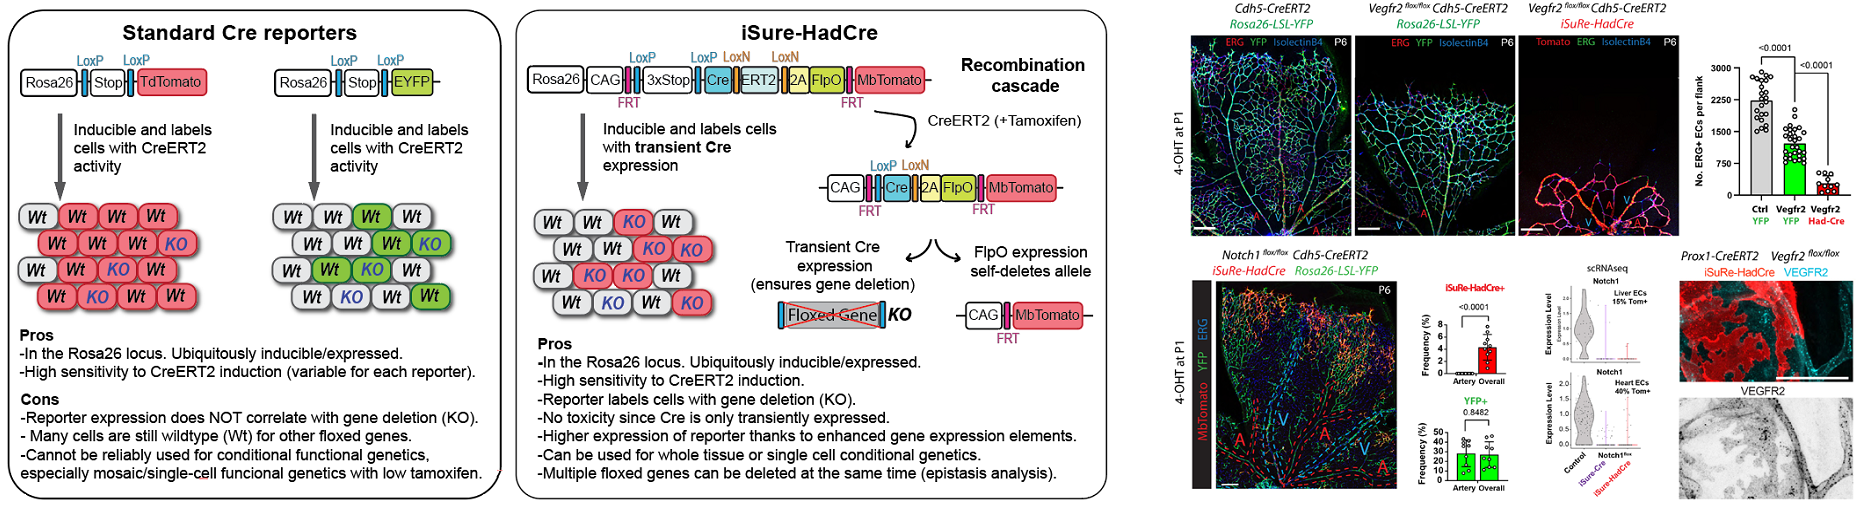 Figure 5. New iSuRe-HadCre technology to ensure conditional genetic deletions in mouse models.